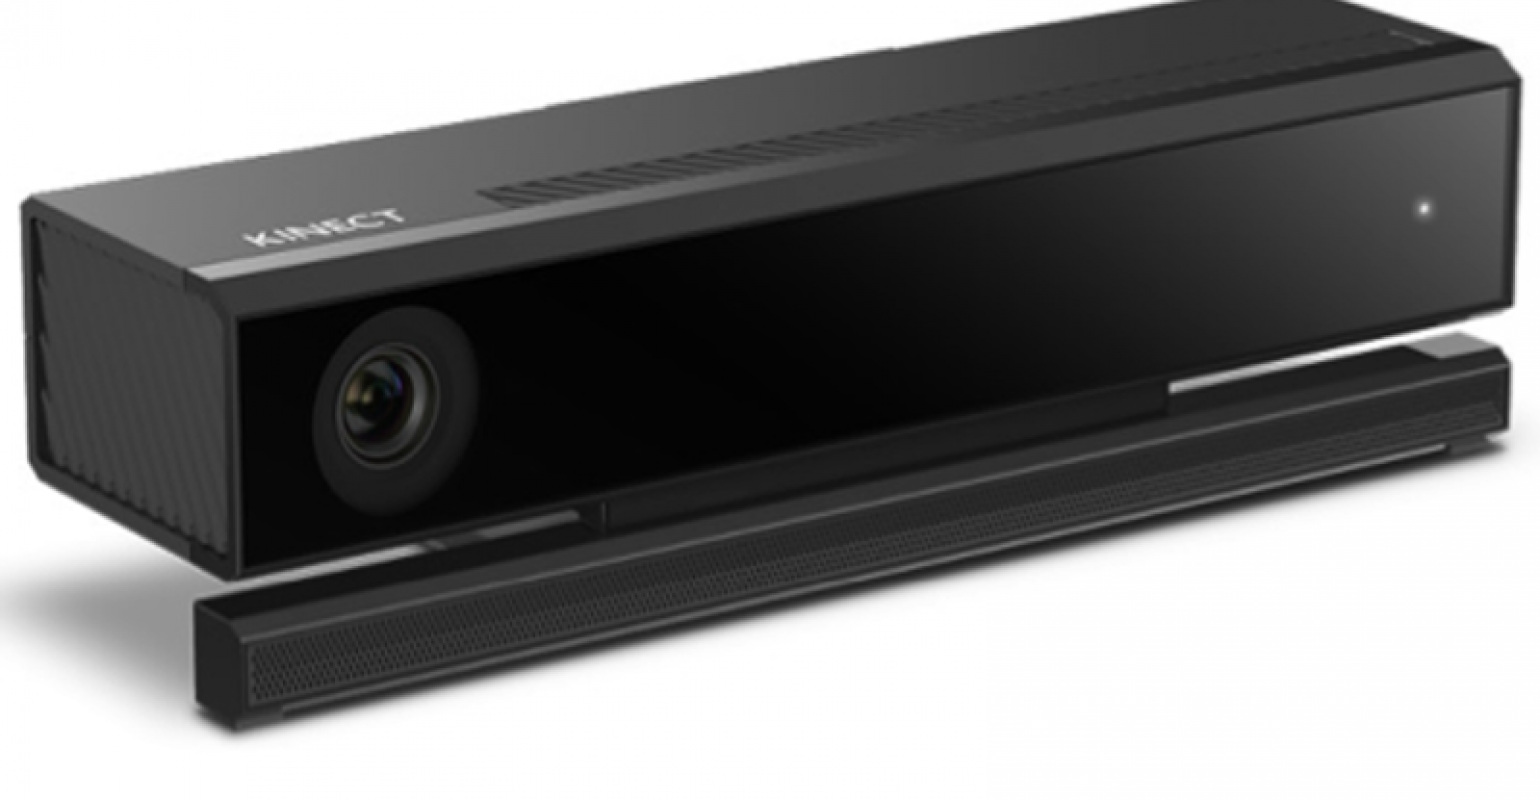 Off center view of Kinect